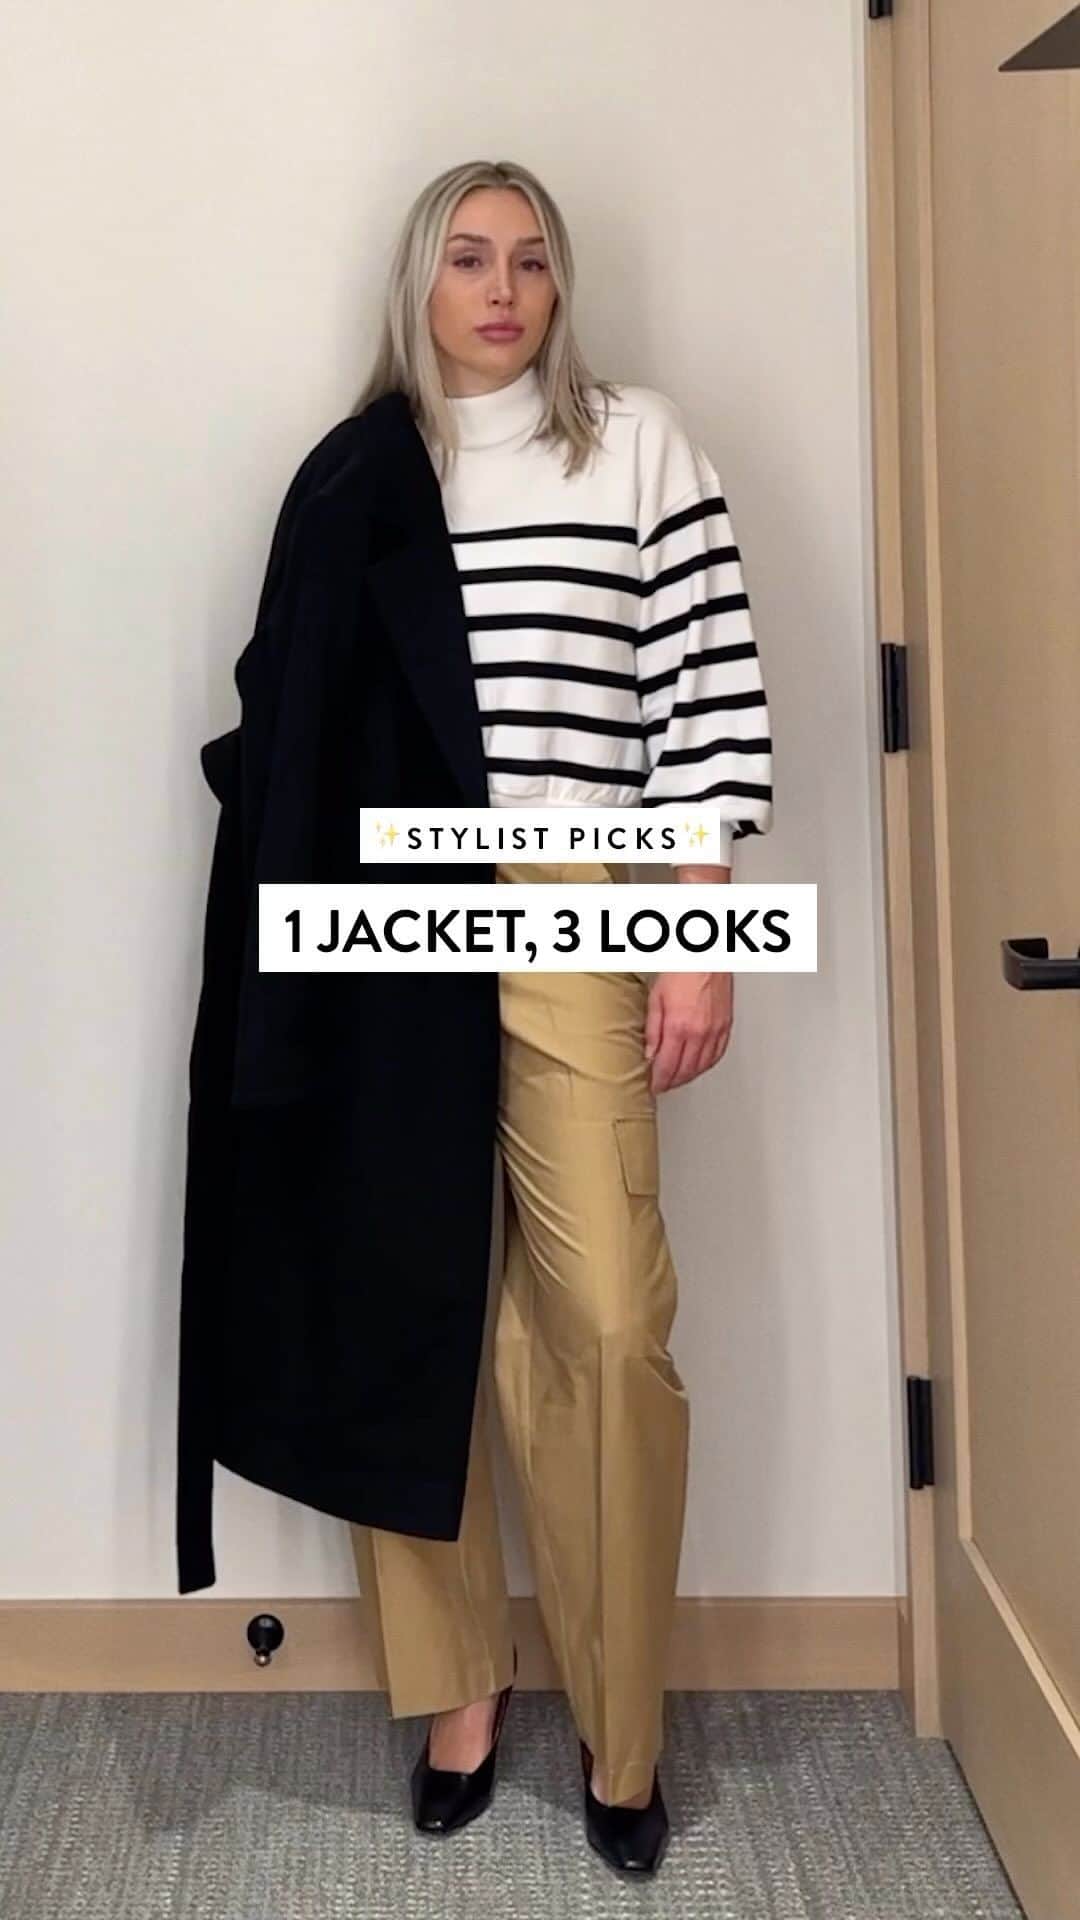 Nordstromのインスタグラム：「✨Stylist Tips✨​  Cooler weather’s here, and jackets are required. A longer, structured style will elevate all your looks—stylist @abbystyledme shows how to take it from dressy to casual:​  ​  1. Drape it over a dress and boots for an evening out.​  2. Layer it with a black bodysuit for errands around town.​  3. Wear it with a sweater and trousers for work.​  Find the season’s key pieces with personalized recs sent right to your inbox—it’s free! Request a look from our stylists at the link in bio.」